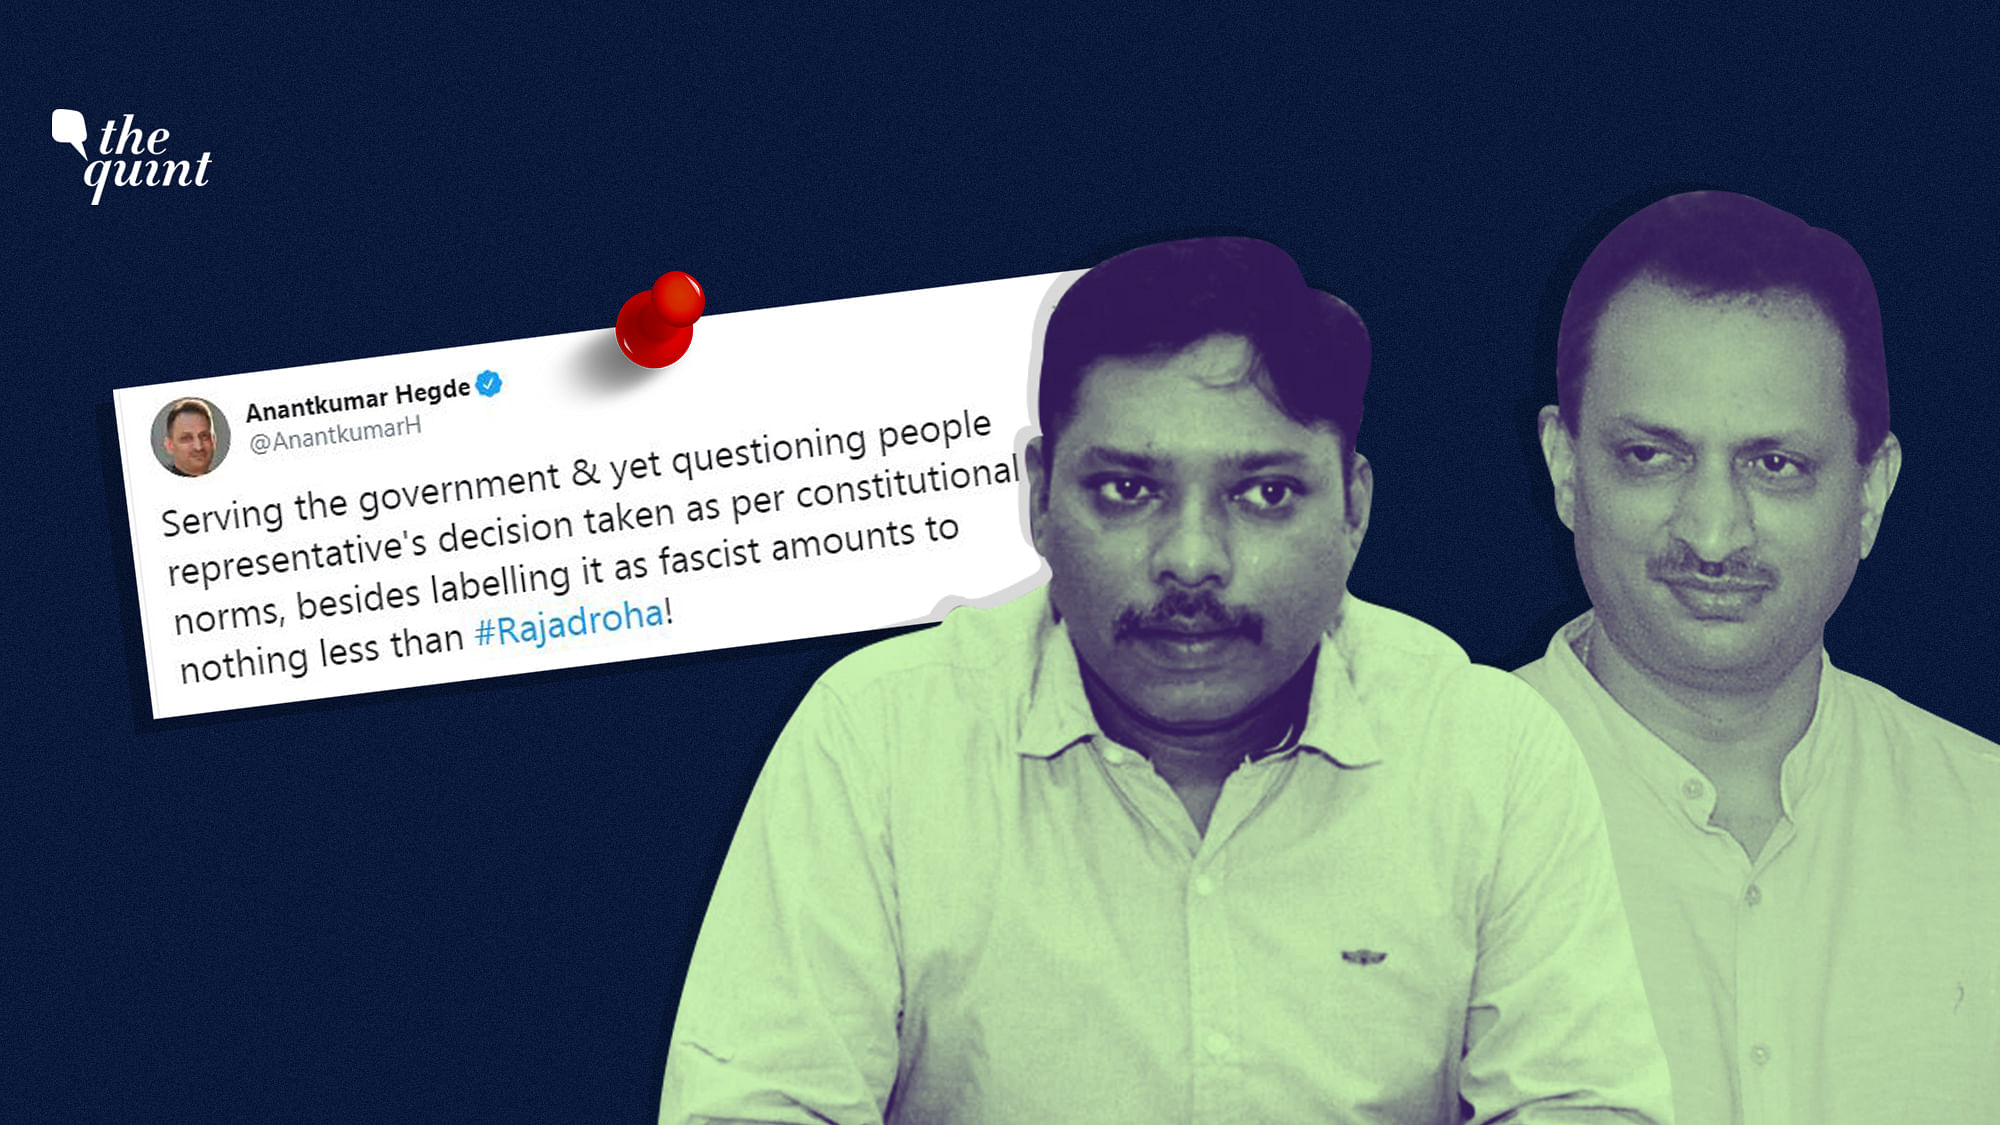 BJP MP Anant Kumar Hegde has lashed out against him in a series of tweets, calling him a “traitor” and asking him to go to Pakistan for his comments against the centre.